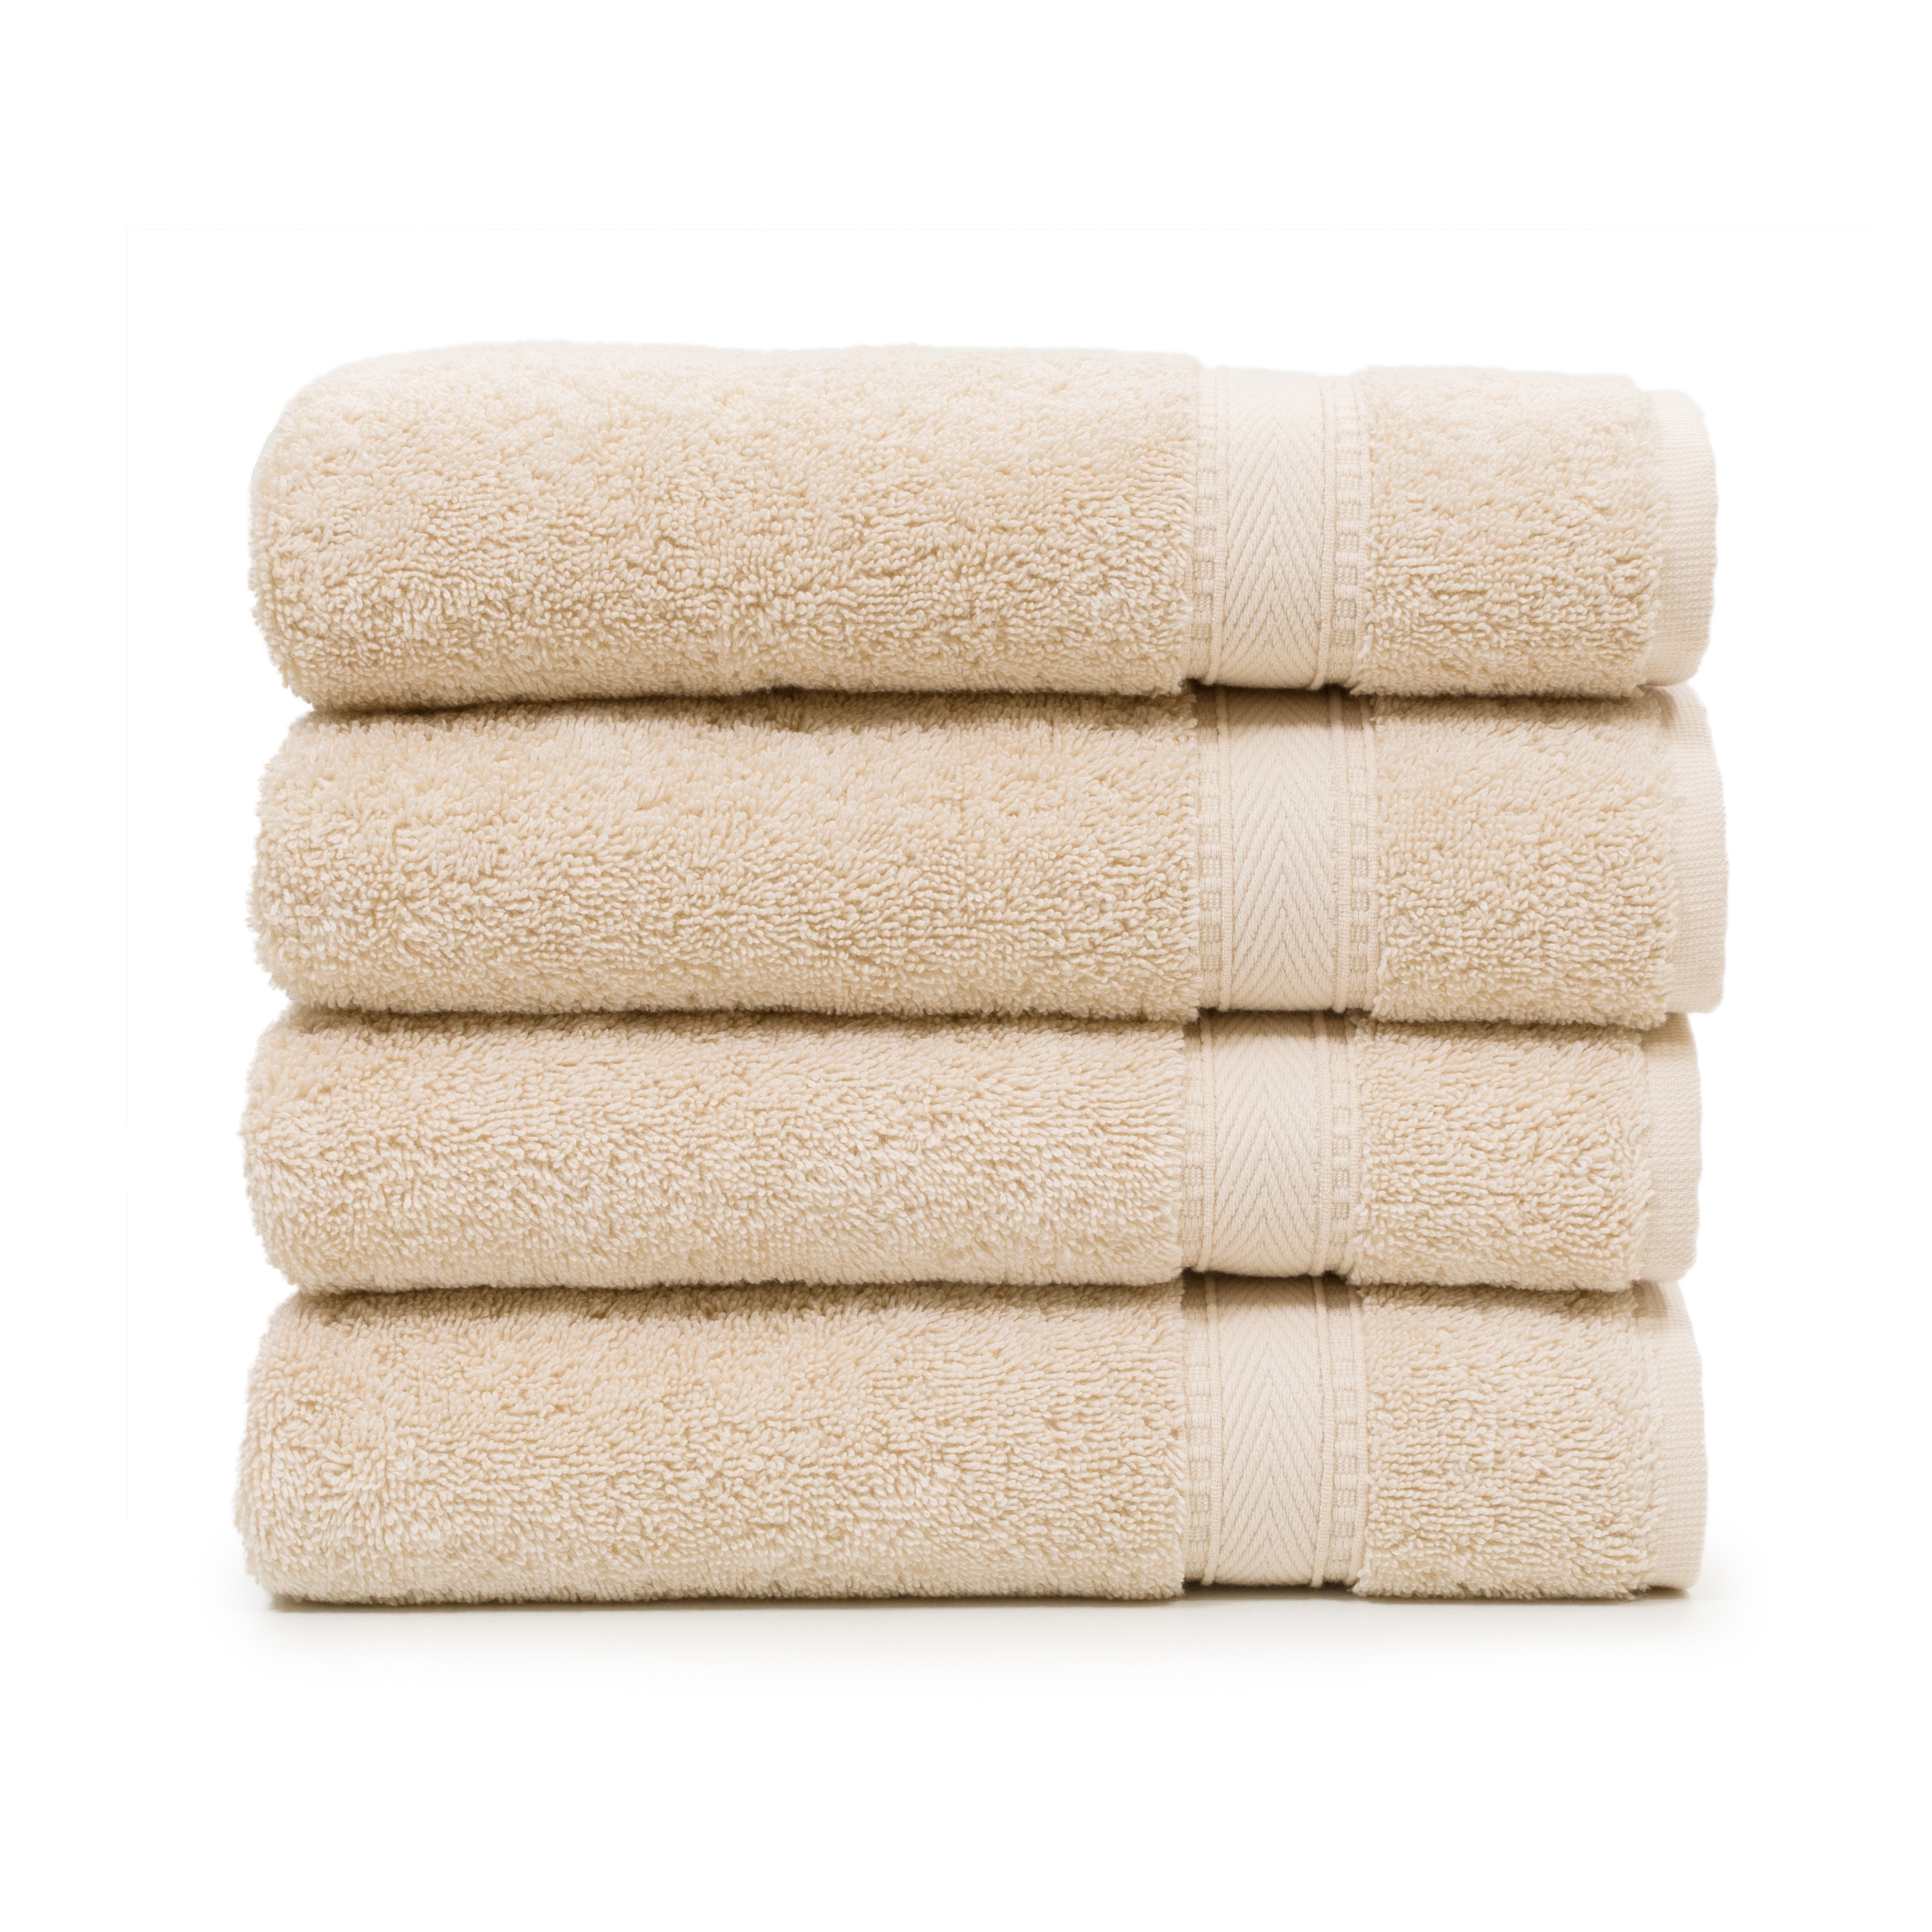 https://ak1.ostkcdn.com/images/products/is/images/direct/27b1b1f8b9c7f39b3b4e65bd11c0caf0f64780aa/Authentic-Hotel-Spa-Turkish-Cotton-Hand-Towels-%28Set-of-4%29.jpg